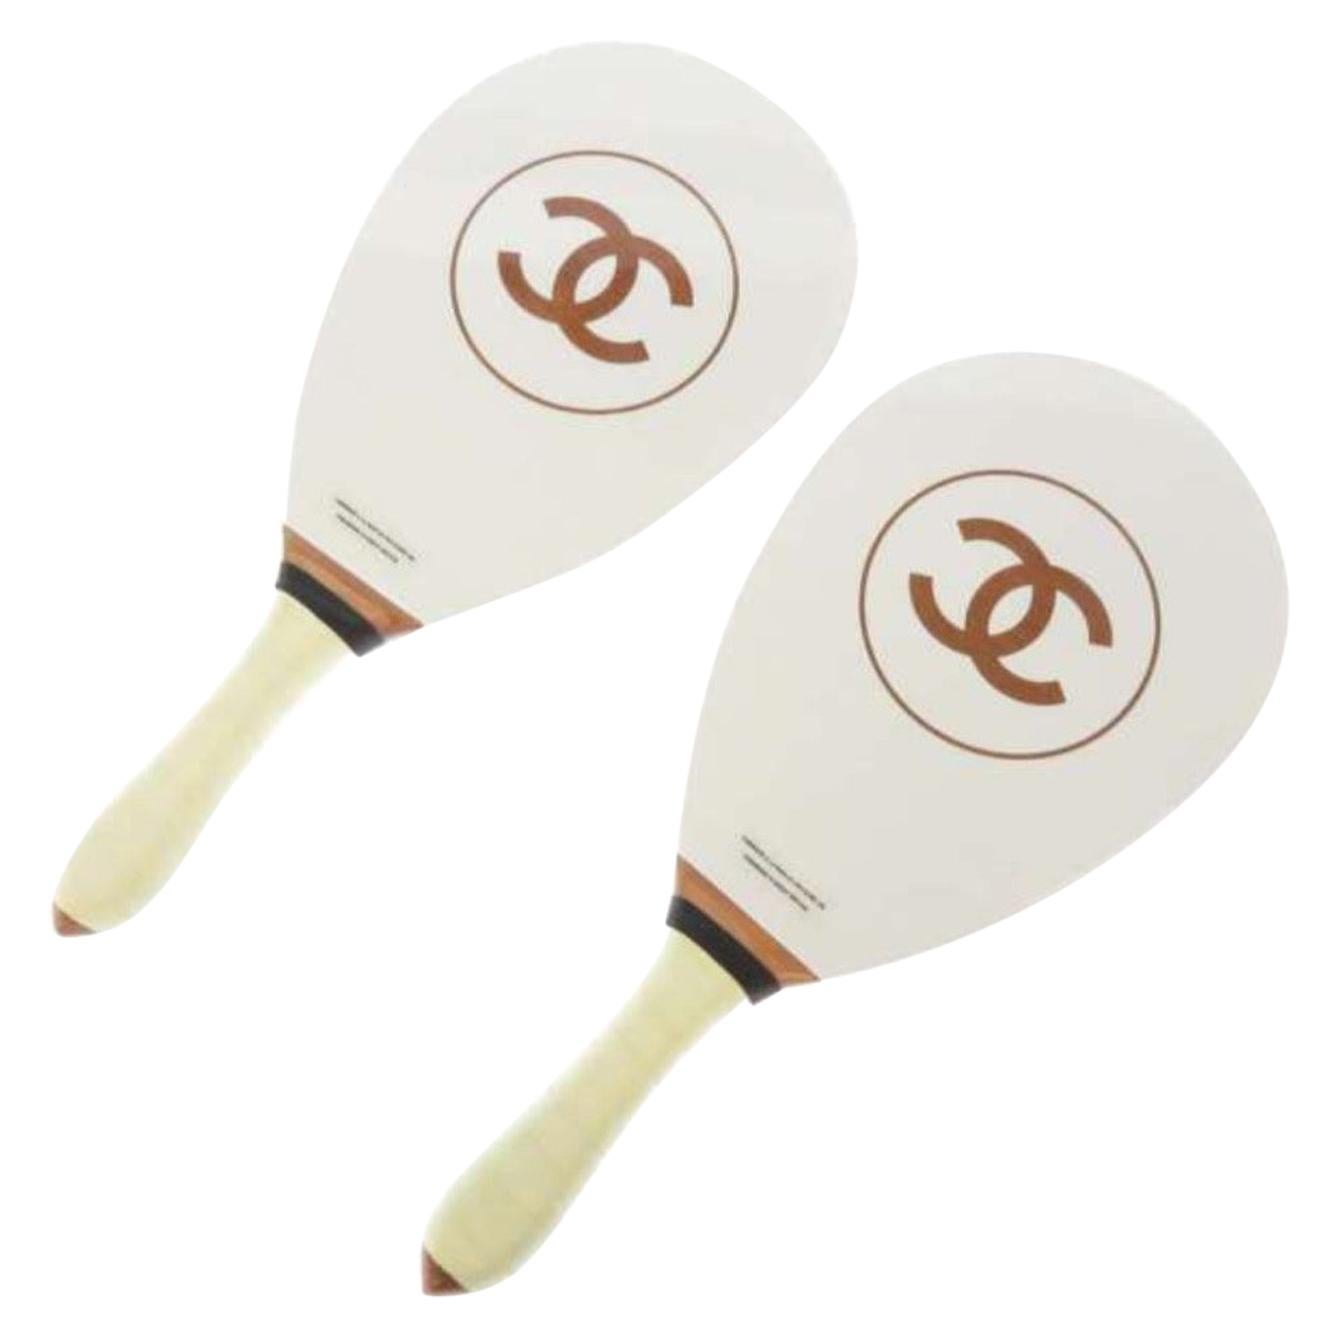 Chanel White Brown Wood Men's Women's Novelty Game Ping Pong Racquets and Balls